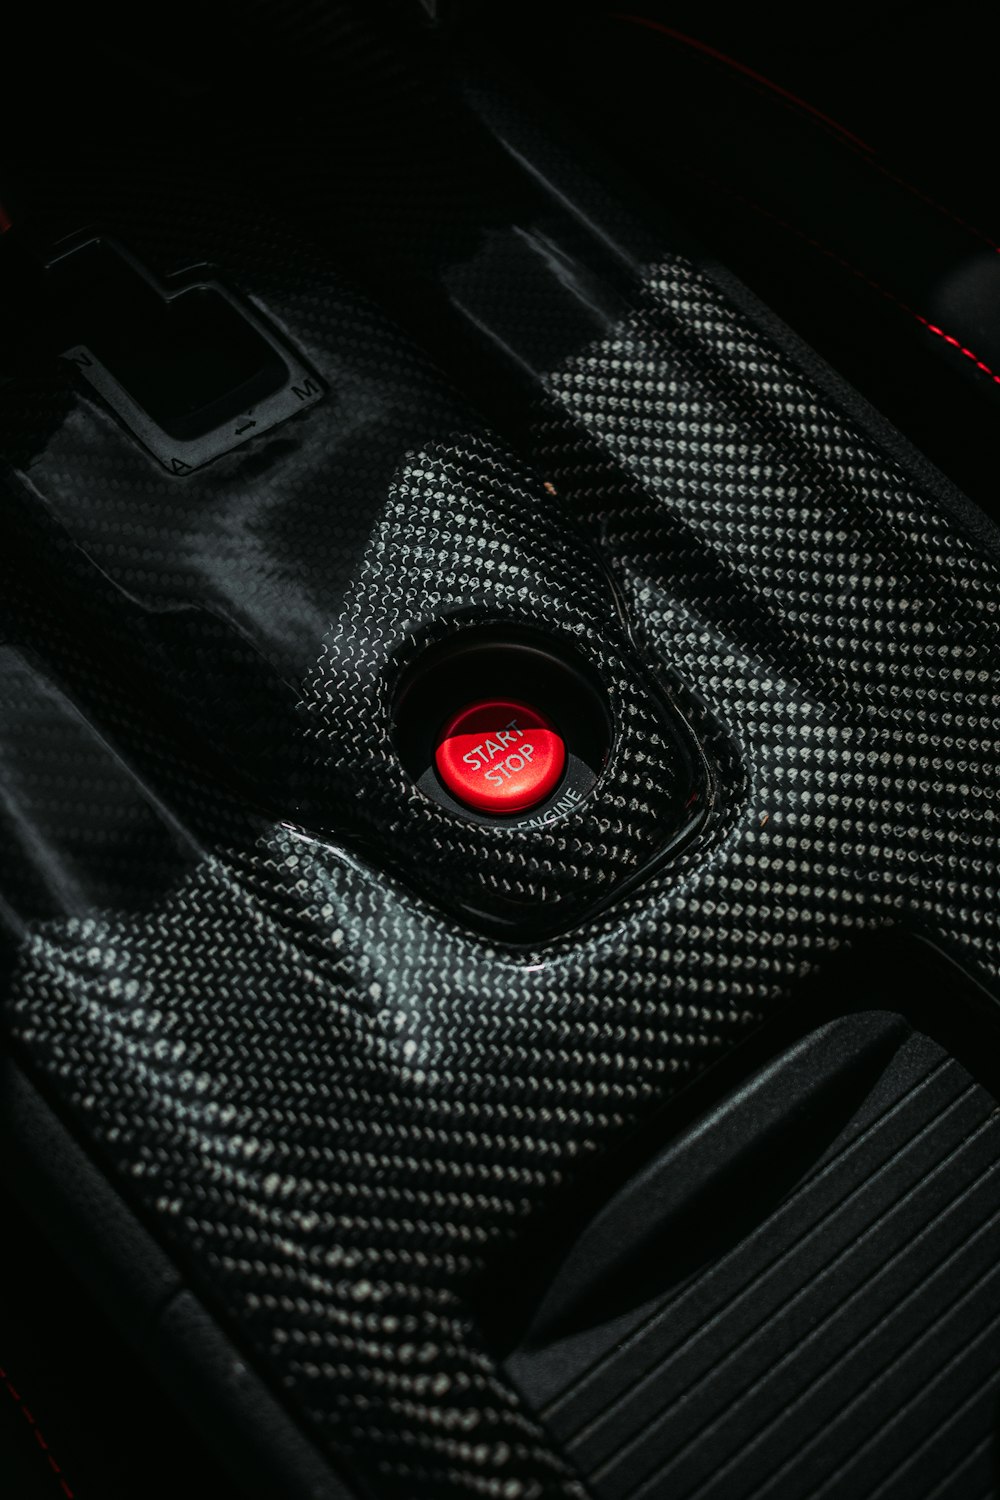 a close up of a red light in a car